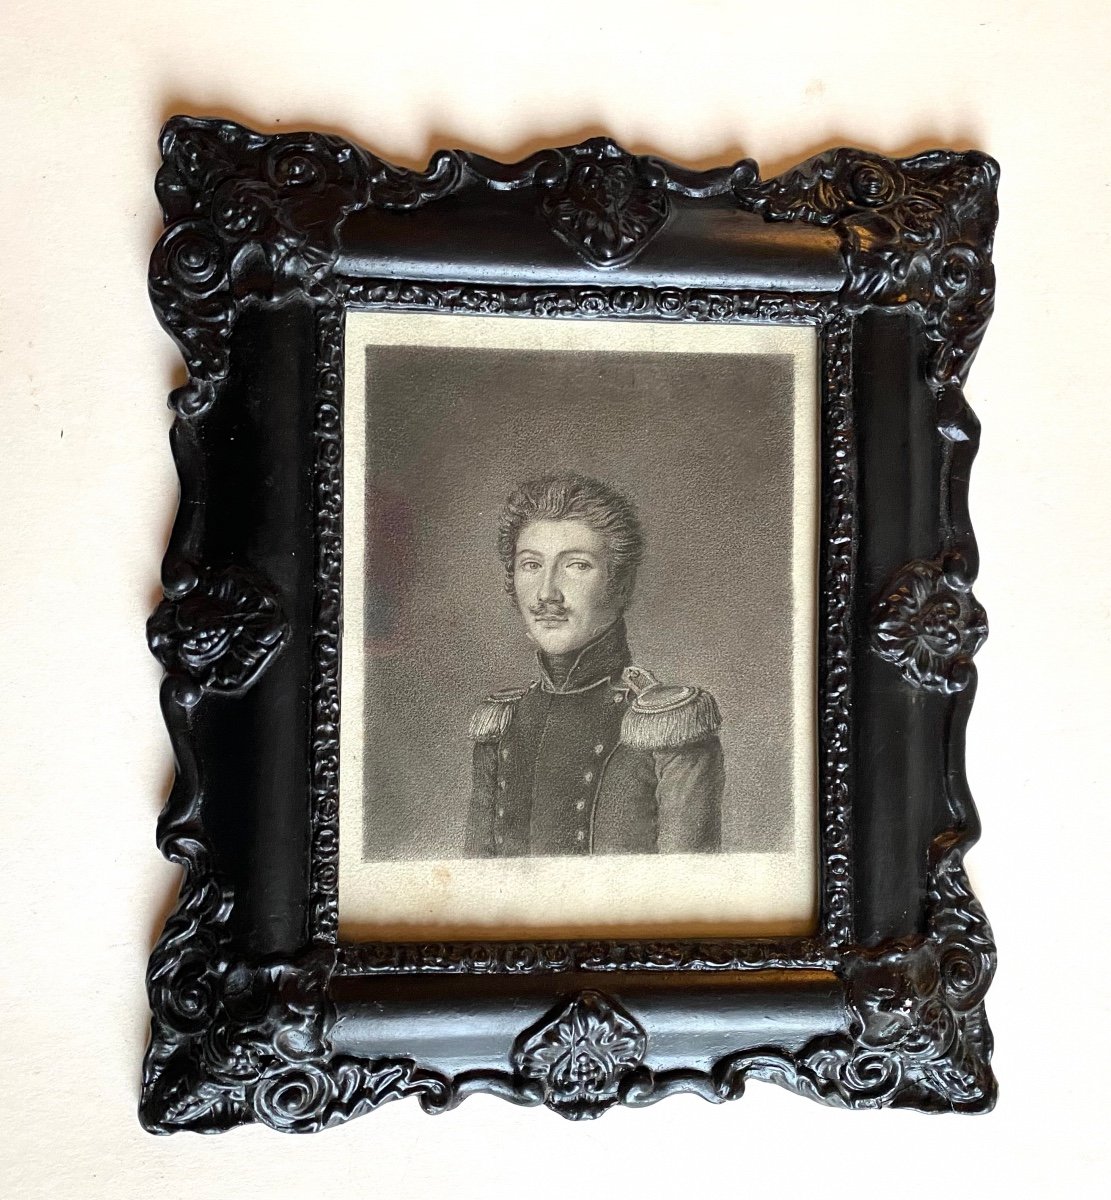 Portrait Of A Young Officer. Framed Charcoal Drawing. 19th Century French School.